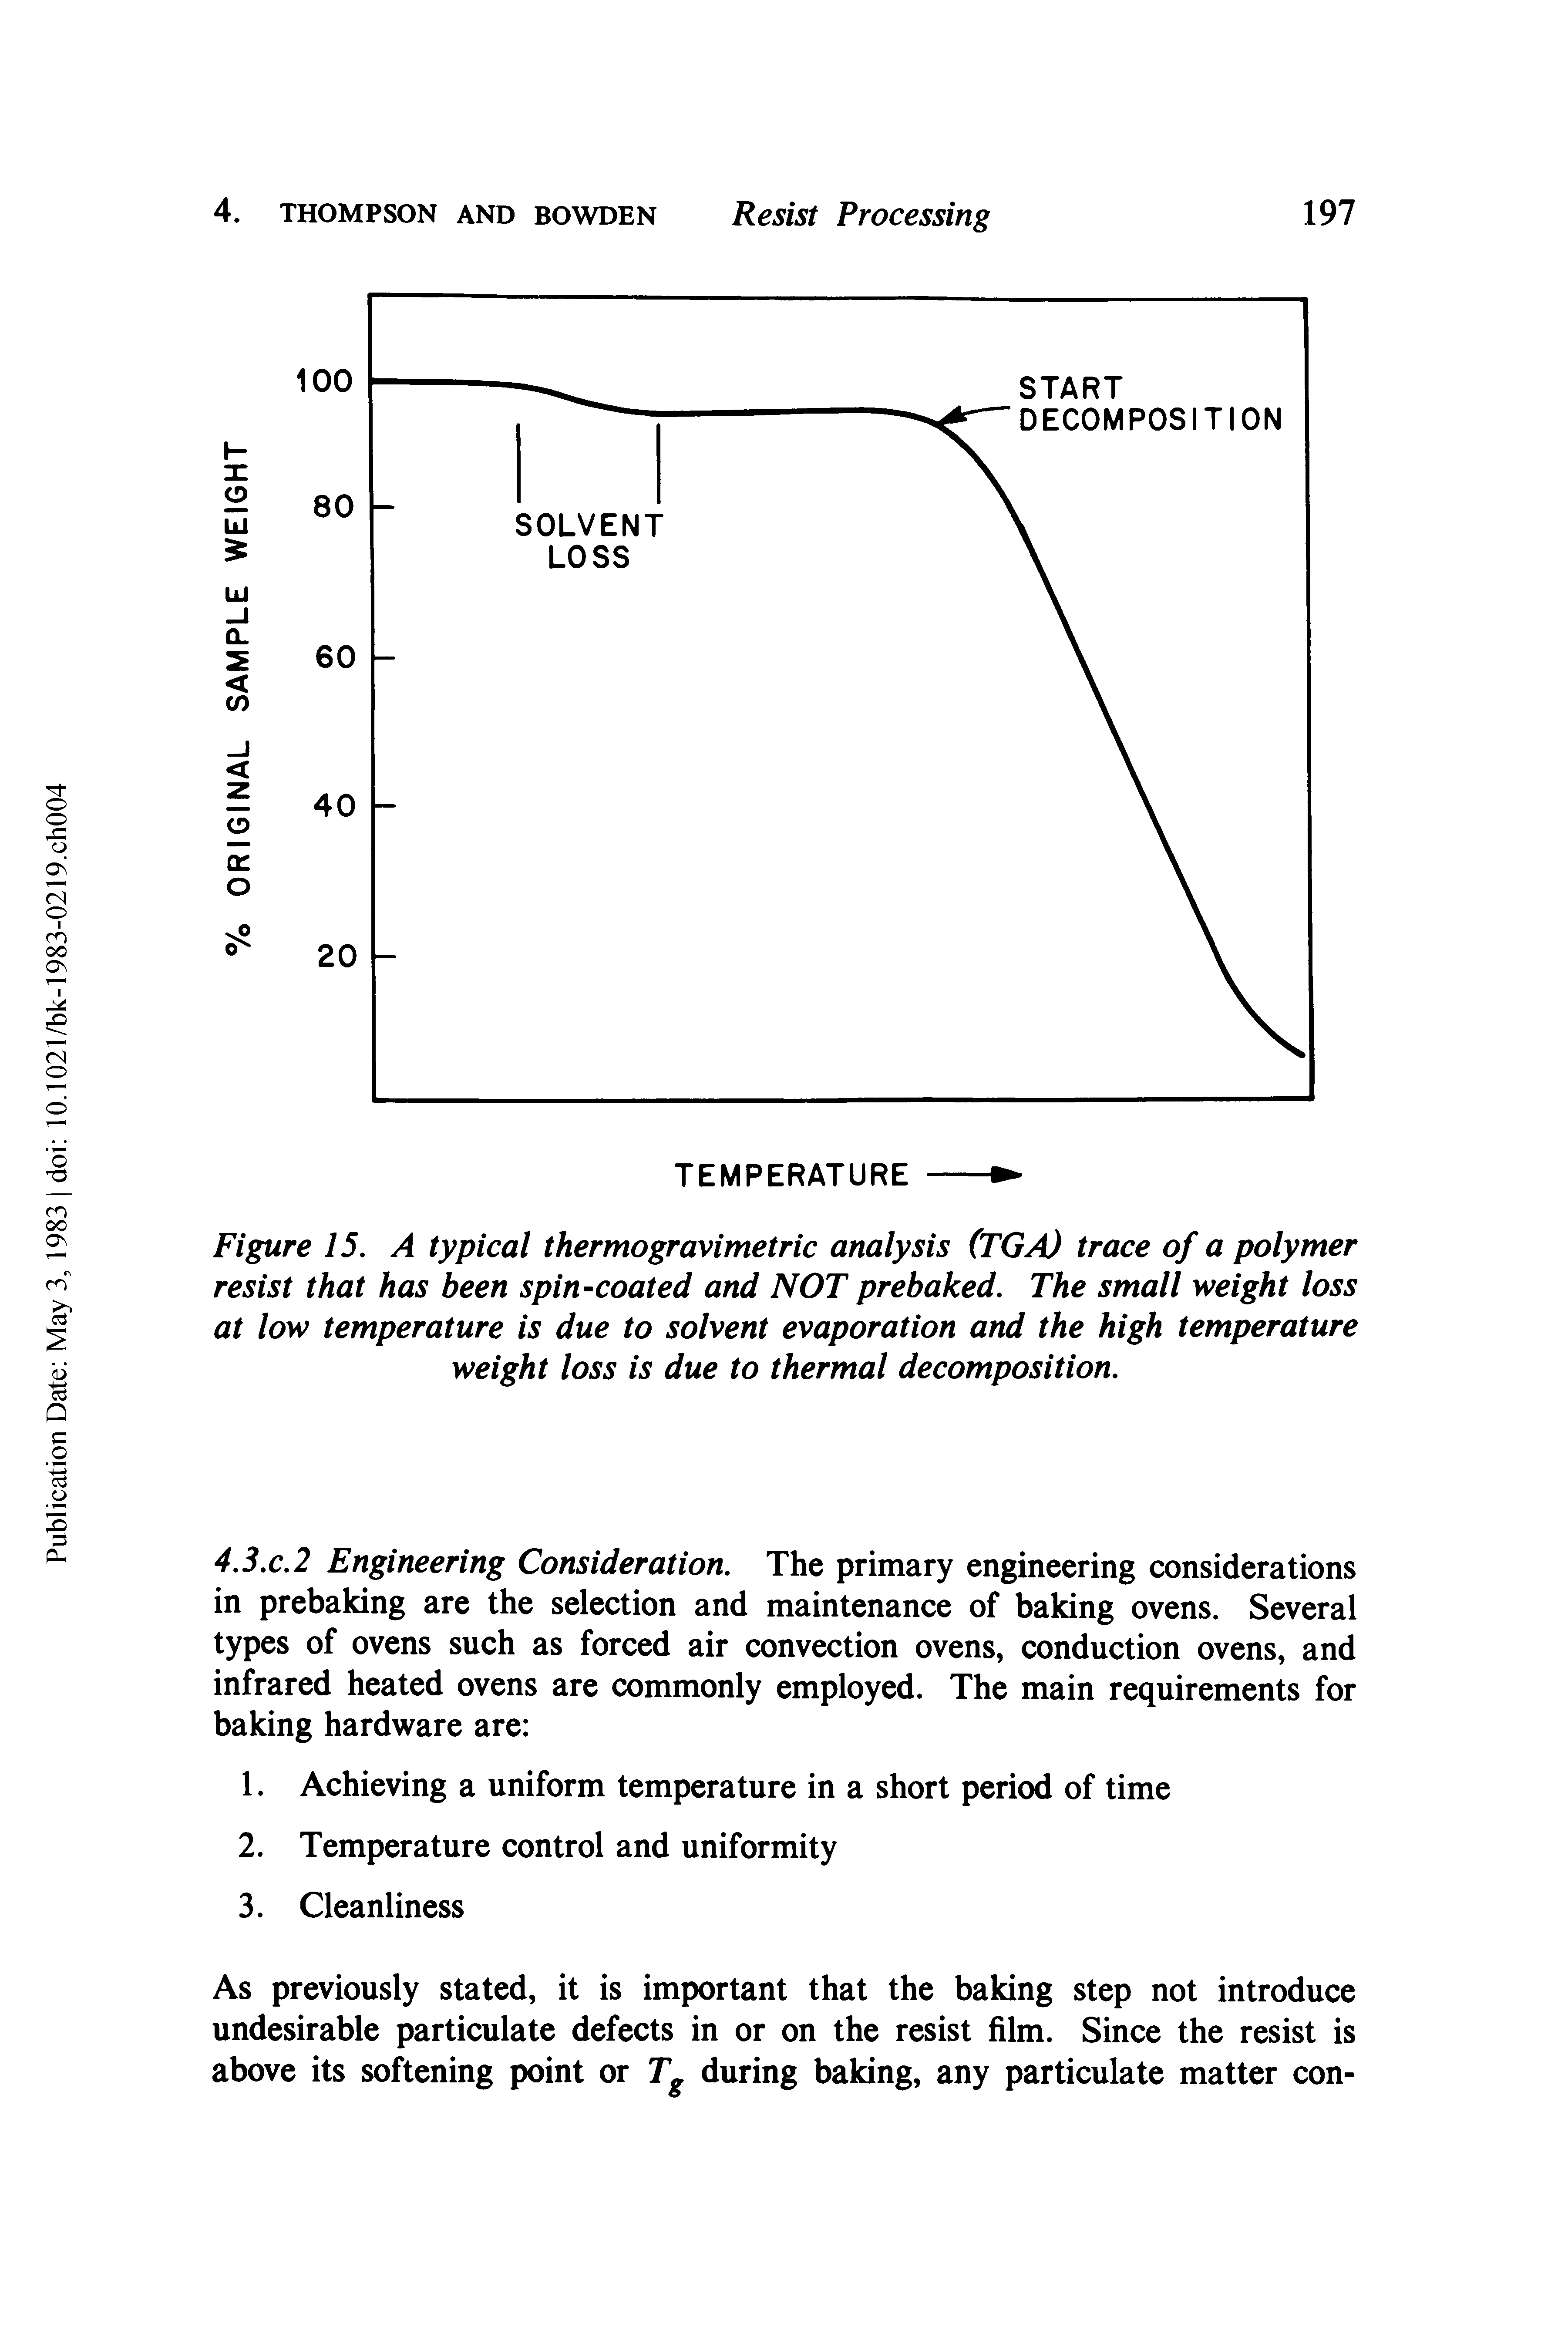 Figure 15. A typical thermogravimetric analysis (TGA) trace of a polymer resist that has been spin-coated and NOT prebaked. The small weight loss at low temperature is due to solvent evaporation and the high temperature weight loss is due to thermal decomposition.